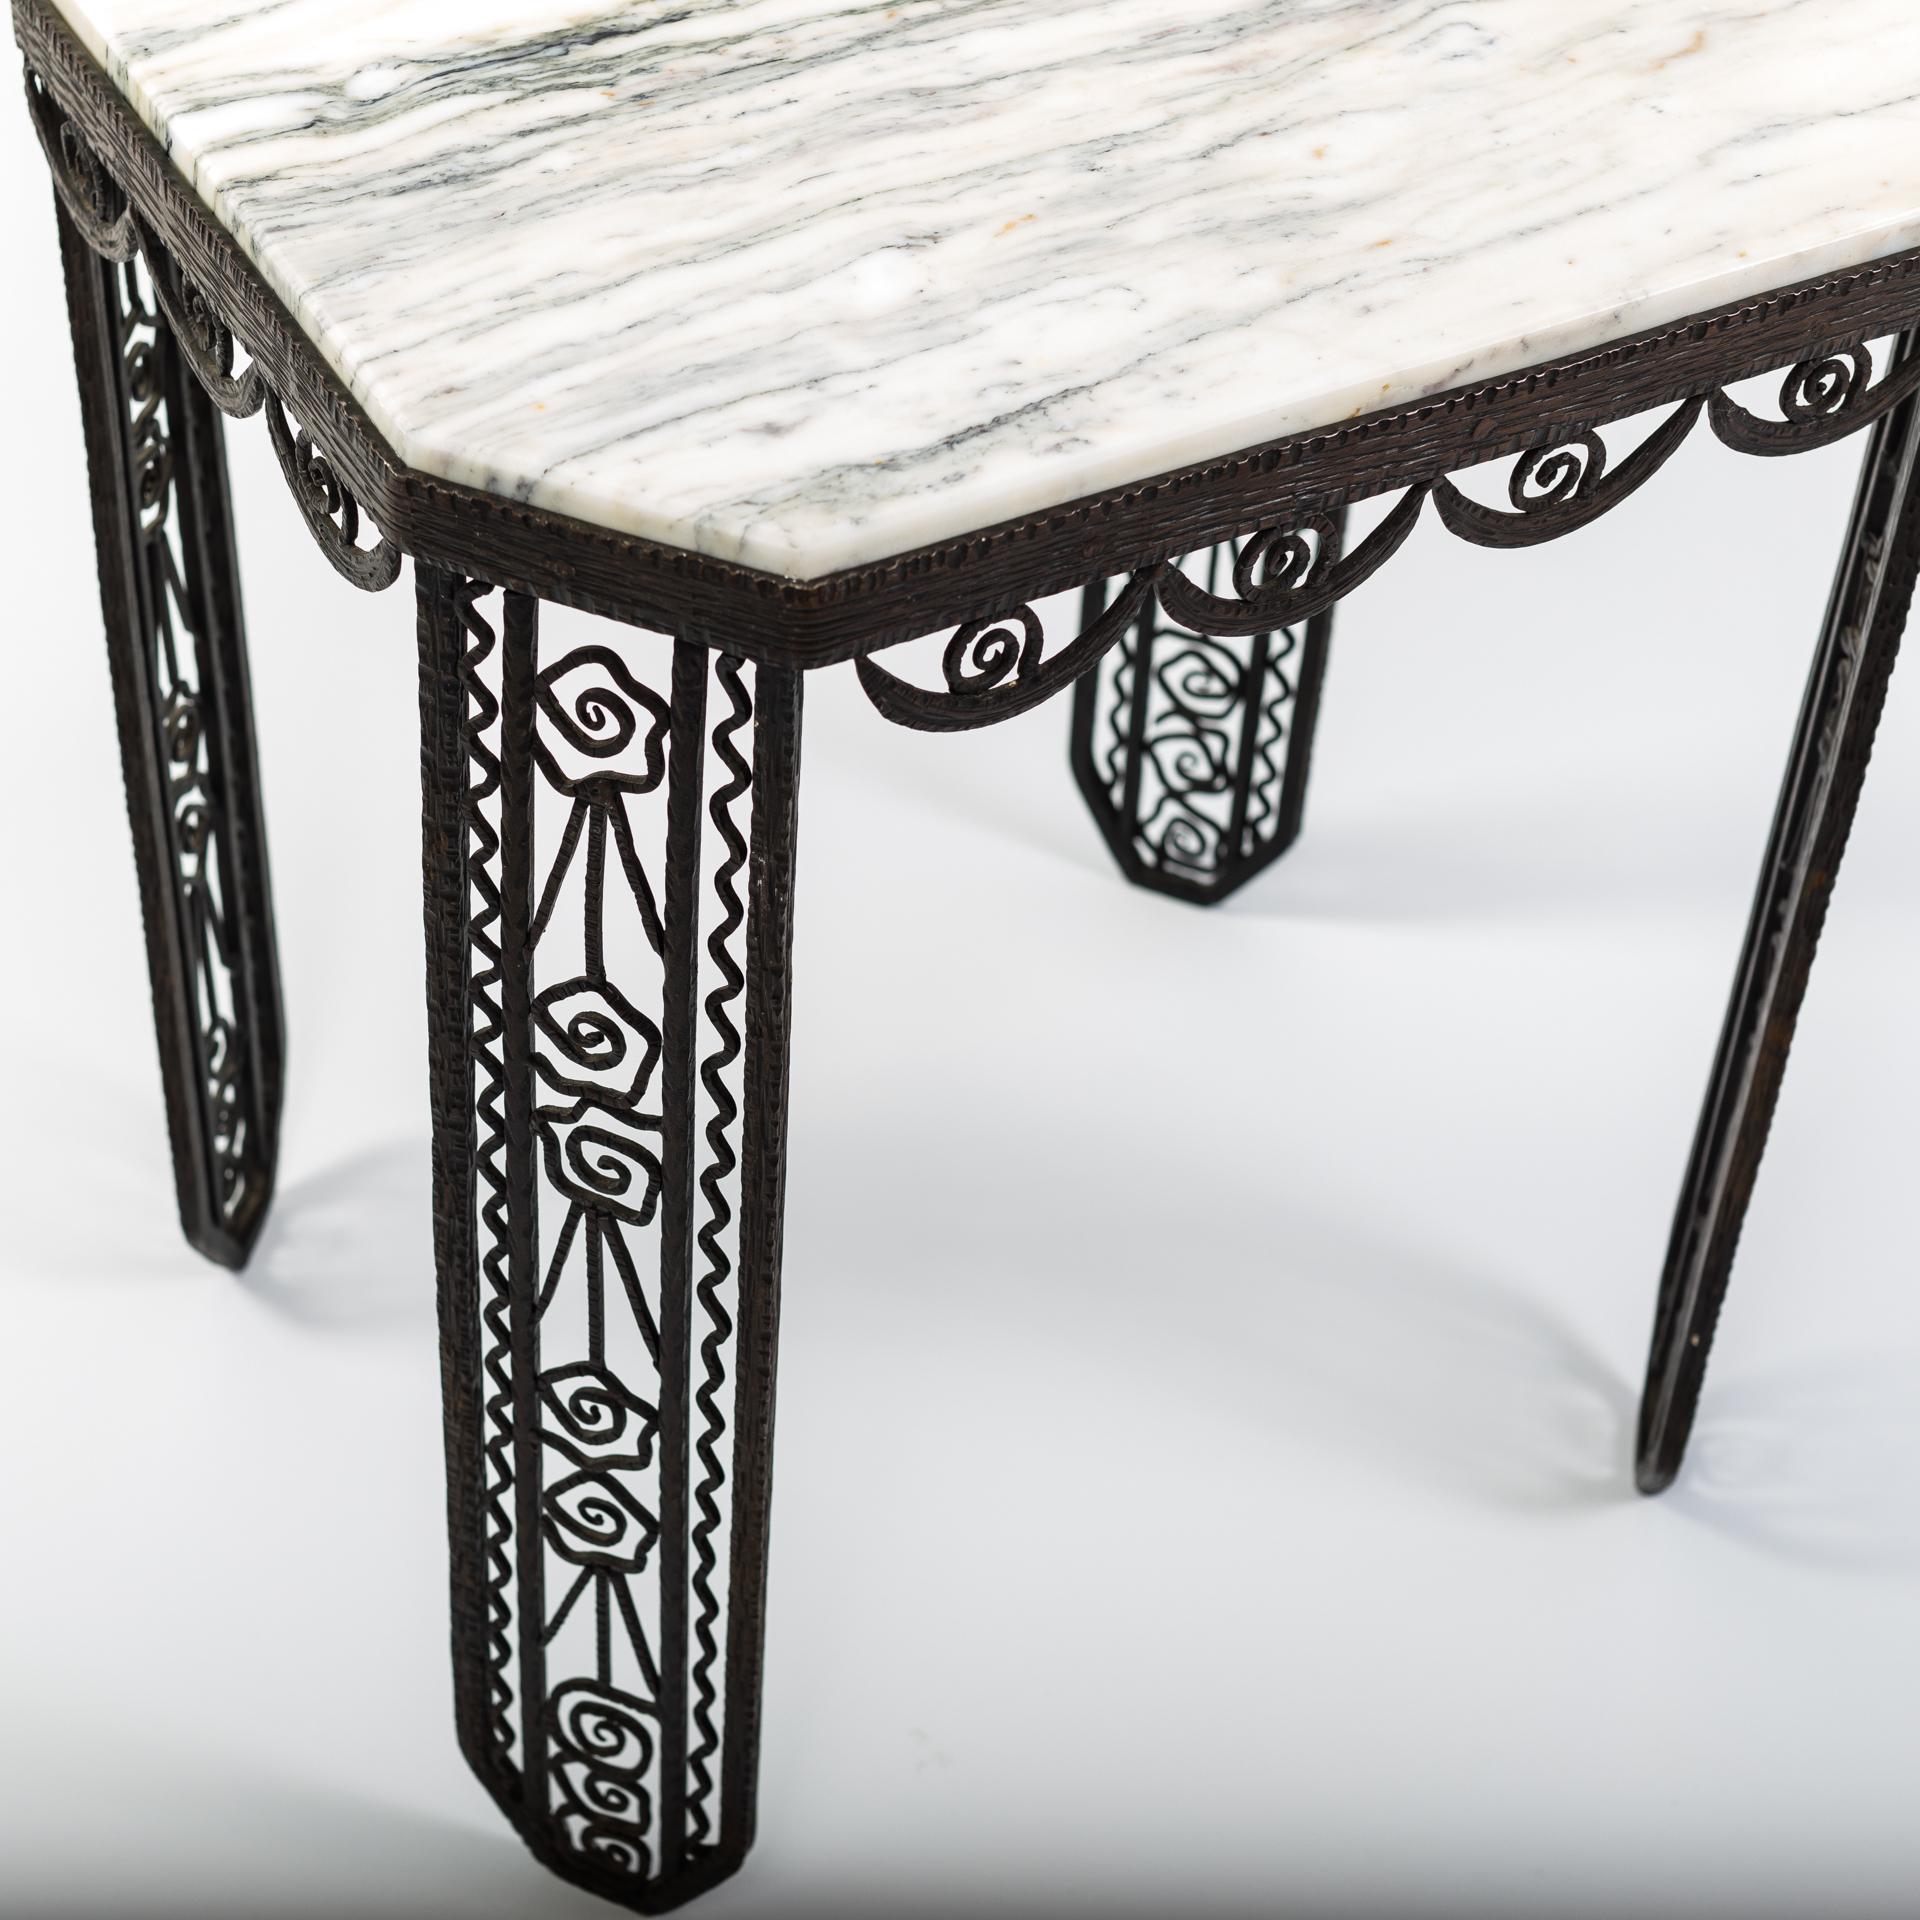 Early 20th Century Early French Art Deco Side Table Forged Iron with Marble Top from 1925